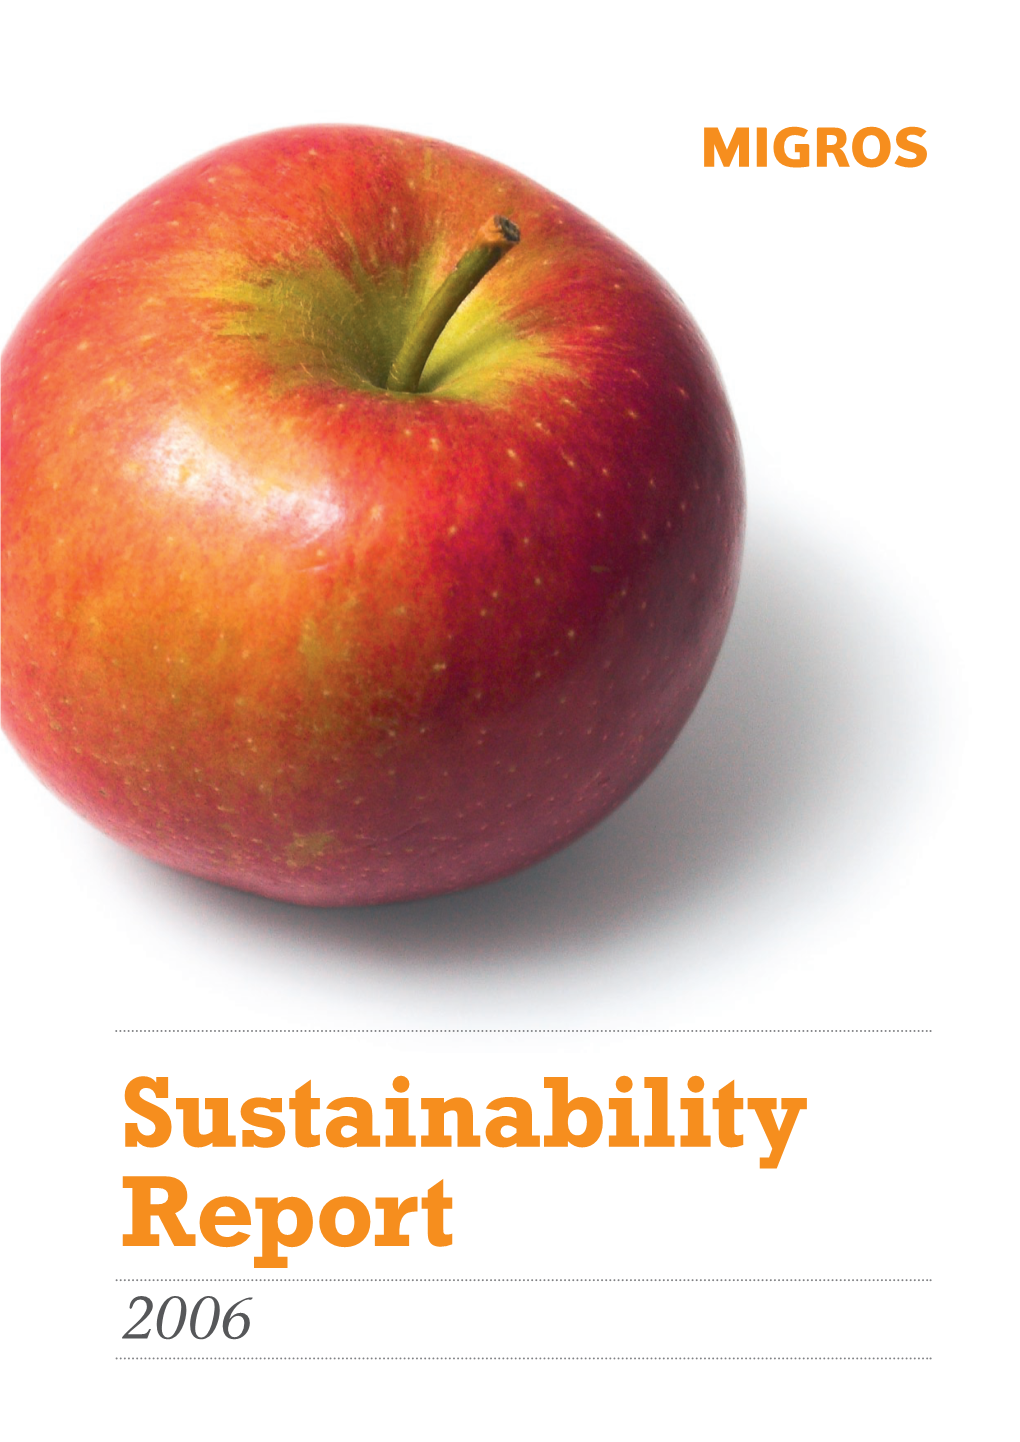 Sustainability Report 2006 Introduction